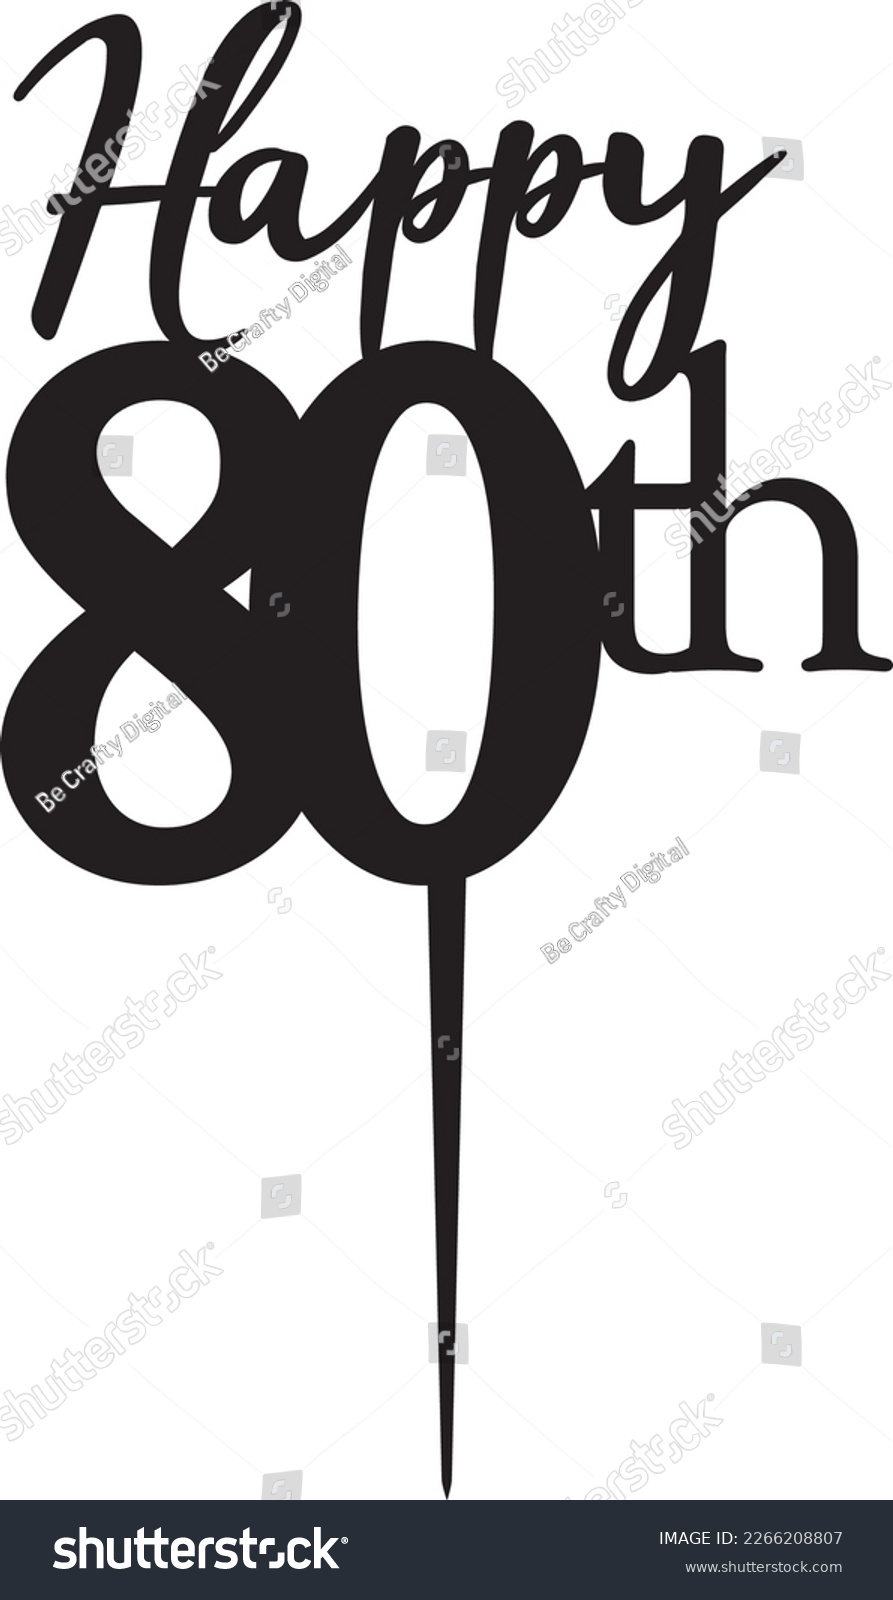 SVG of Happy 80th Happy Birthday Cake Topper Laser Cut Cut File svg